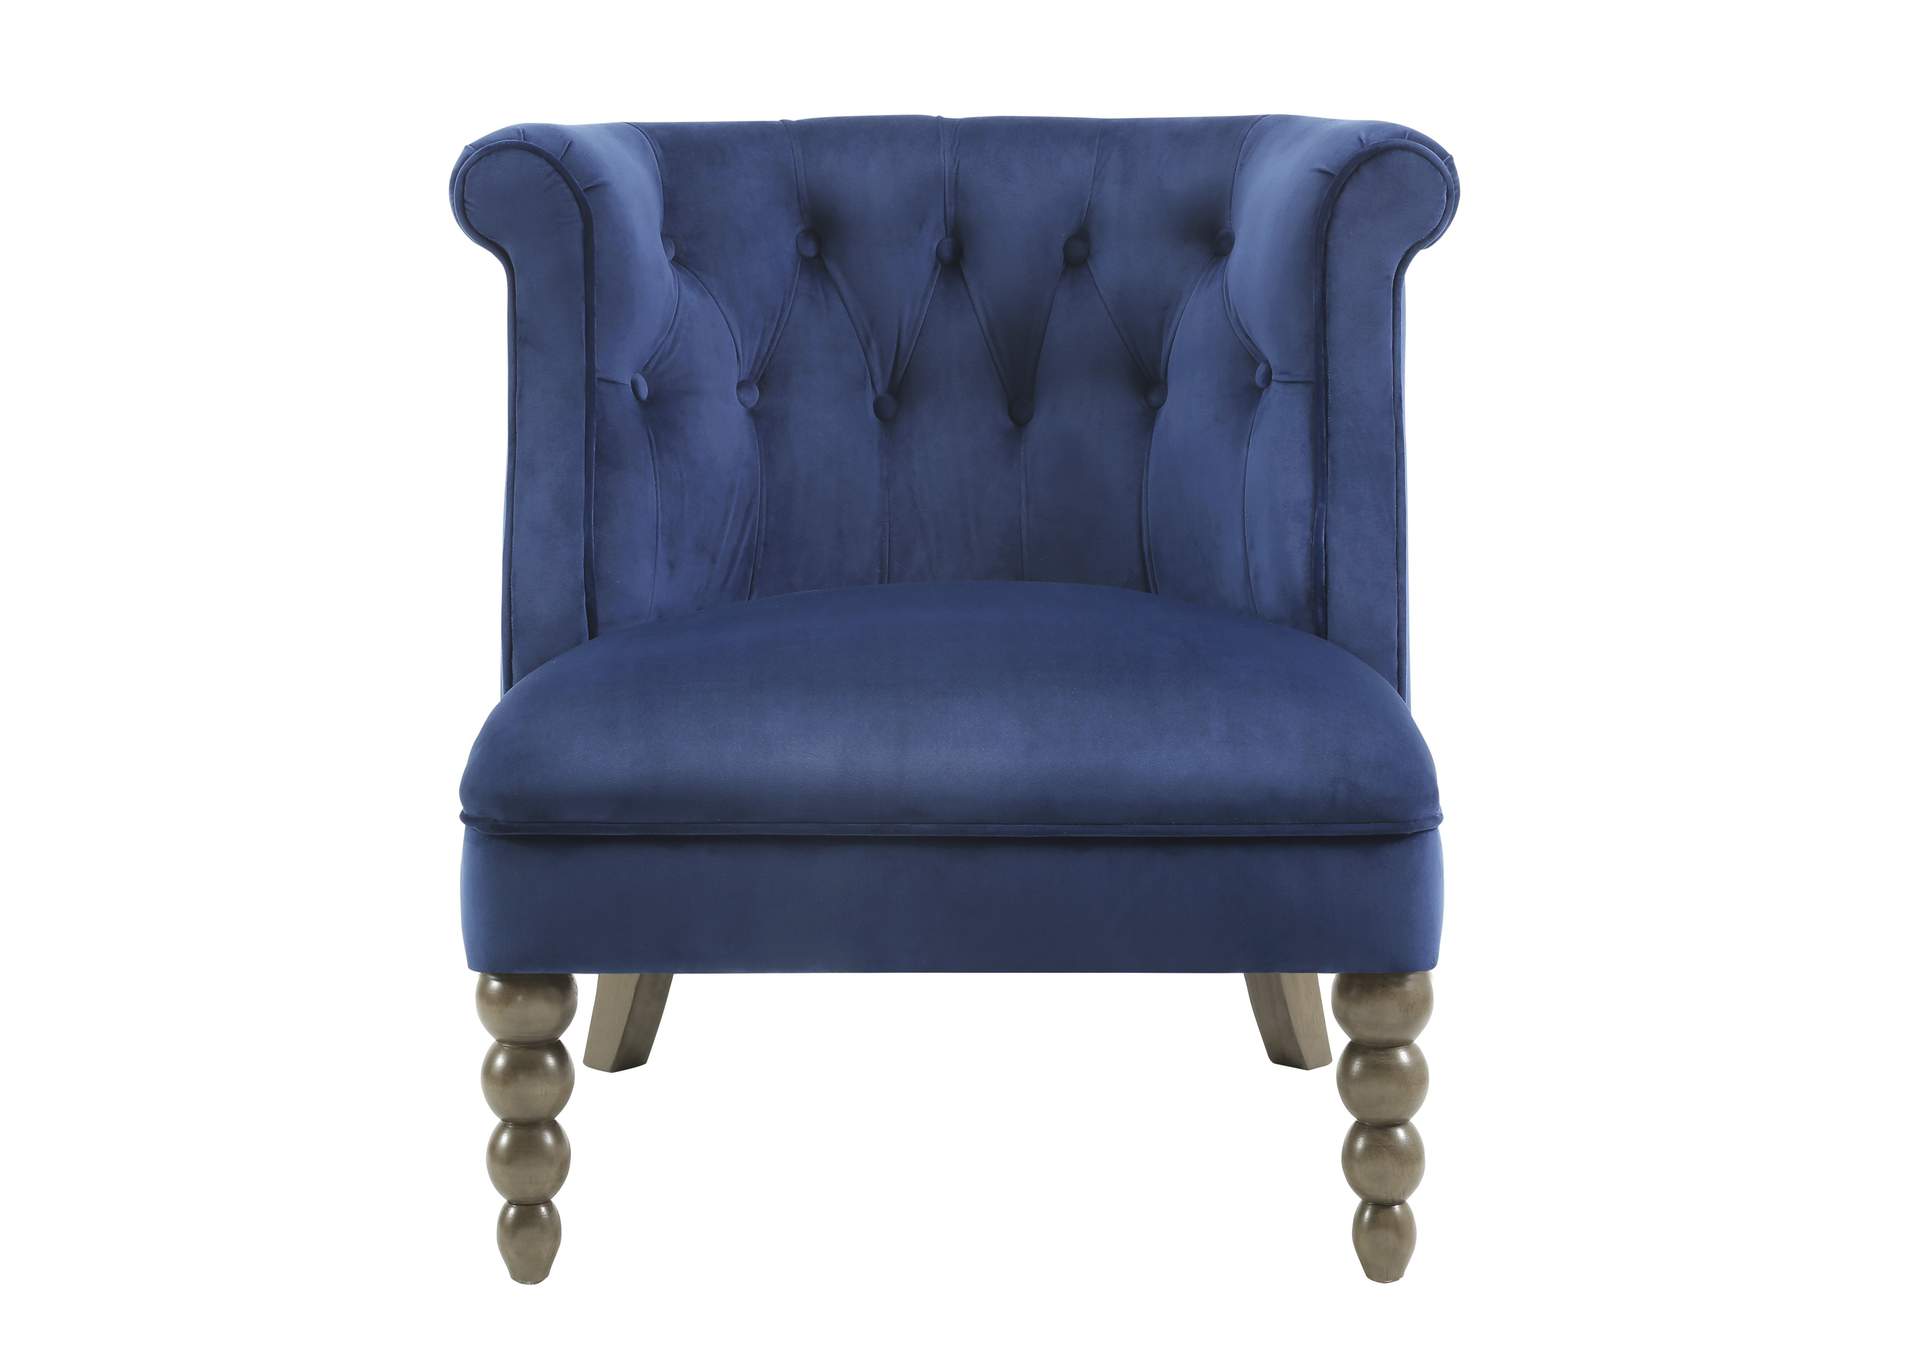 Navy Accent Chair In Living Room